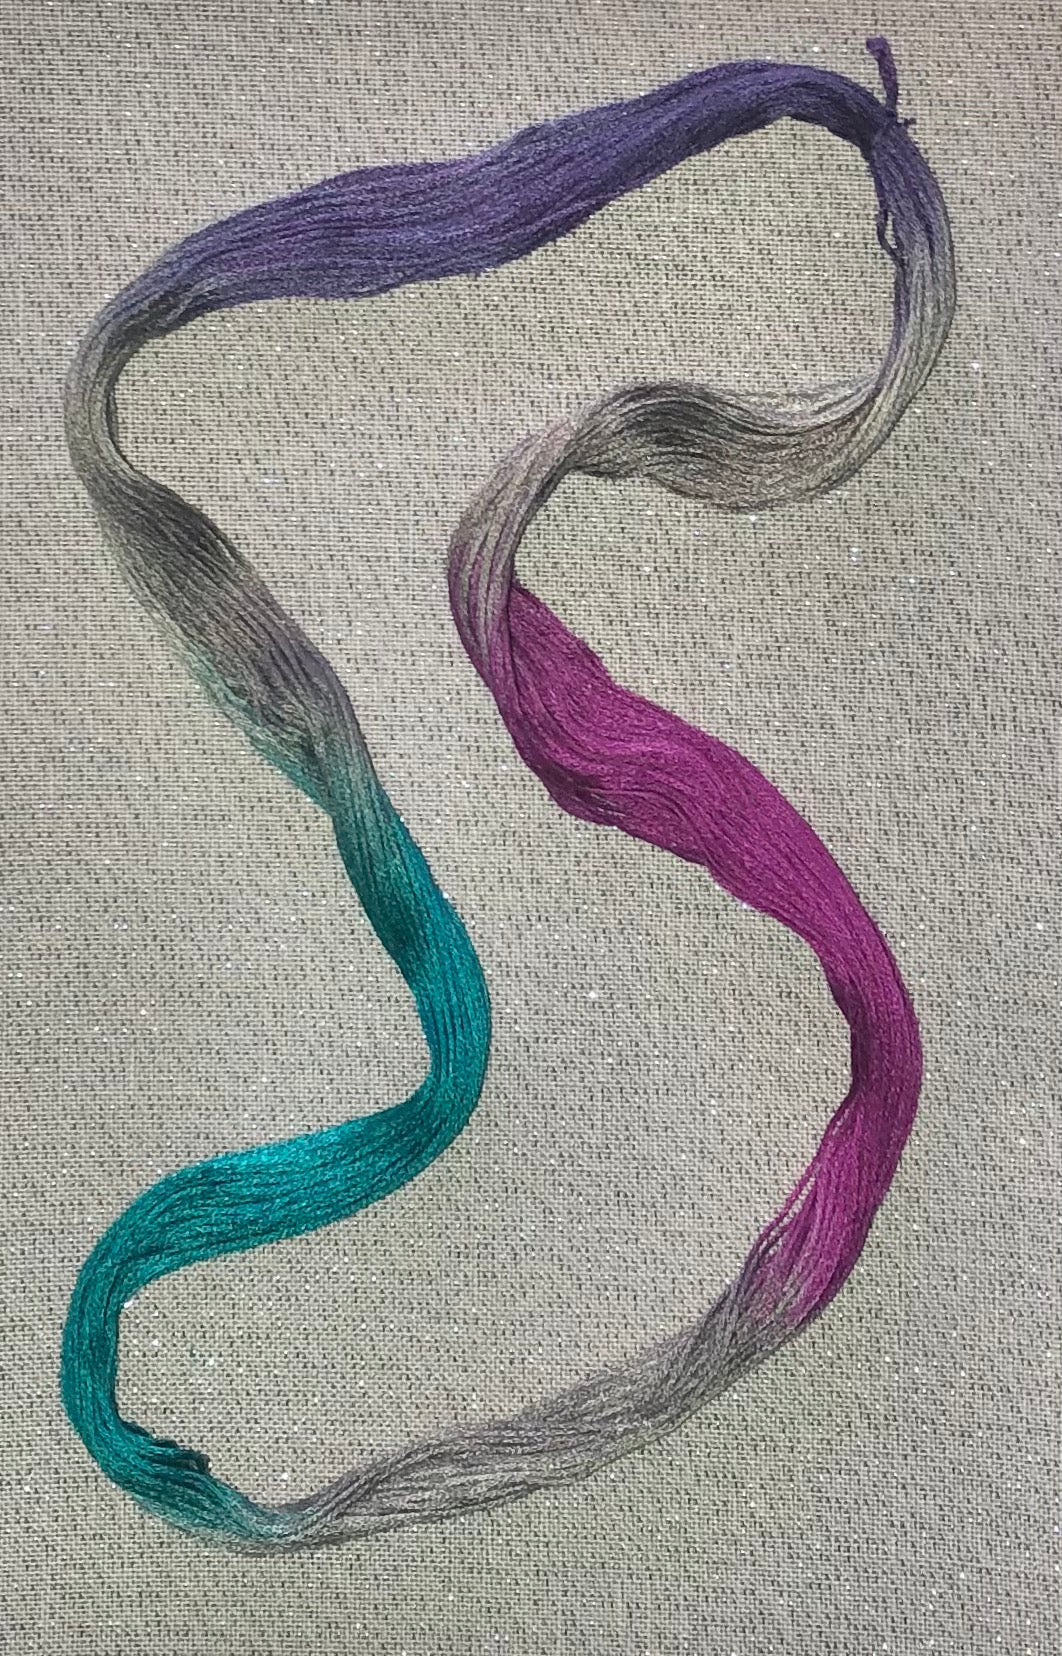 Silk hand dyed floss - Pirate's Booty - Dyeing for Cross Stitch